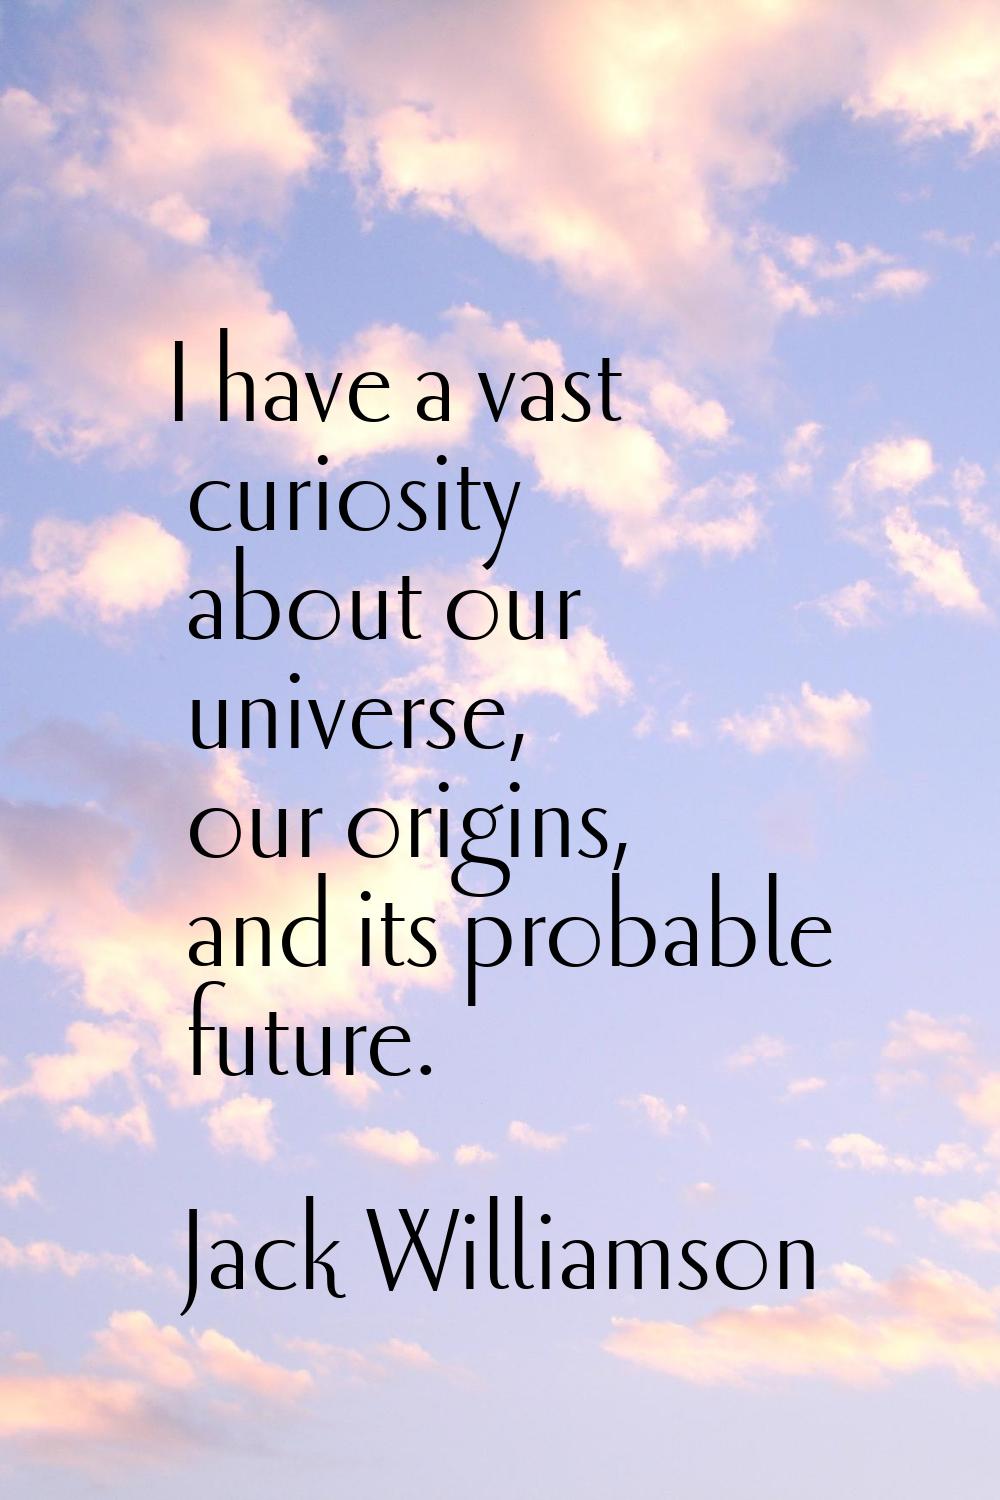 I have a vast curiosity about our universe, our origins, and its probable future.